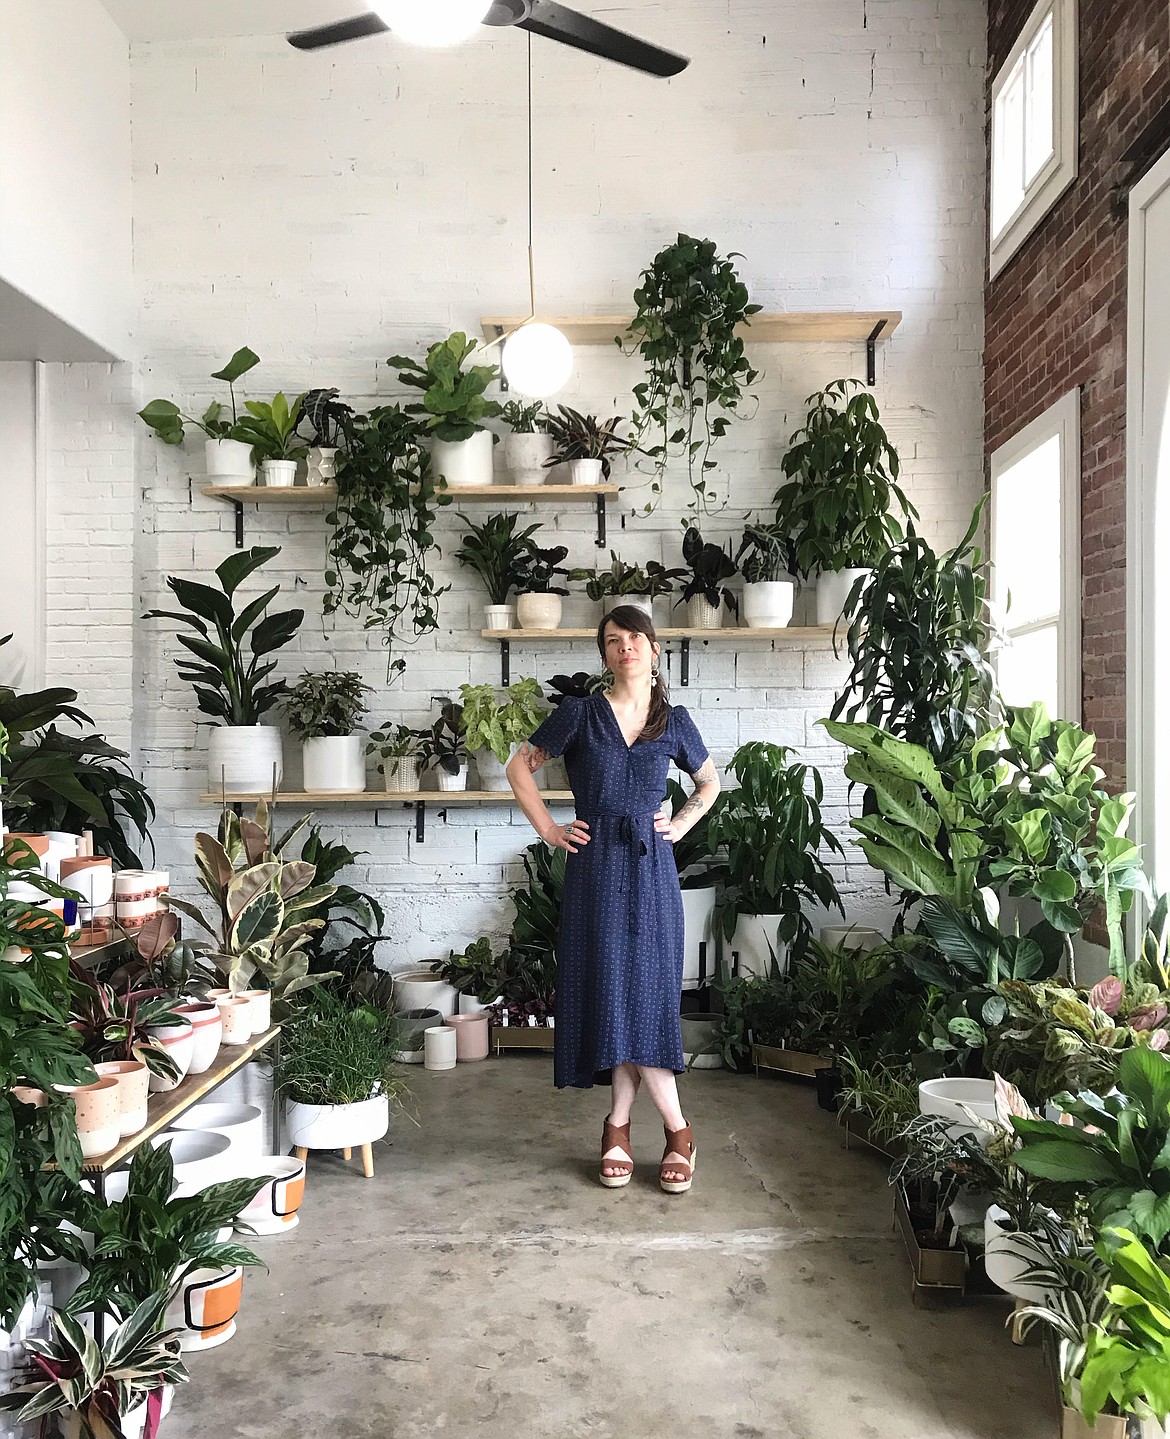 Amy Dolomont is pictured inside the Fern plant shop, located in the newly remodeled building at 211 E. Lakeside Ave.